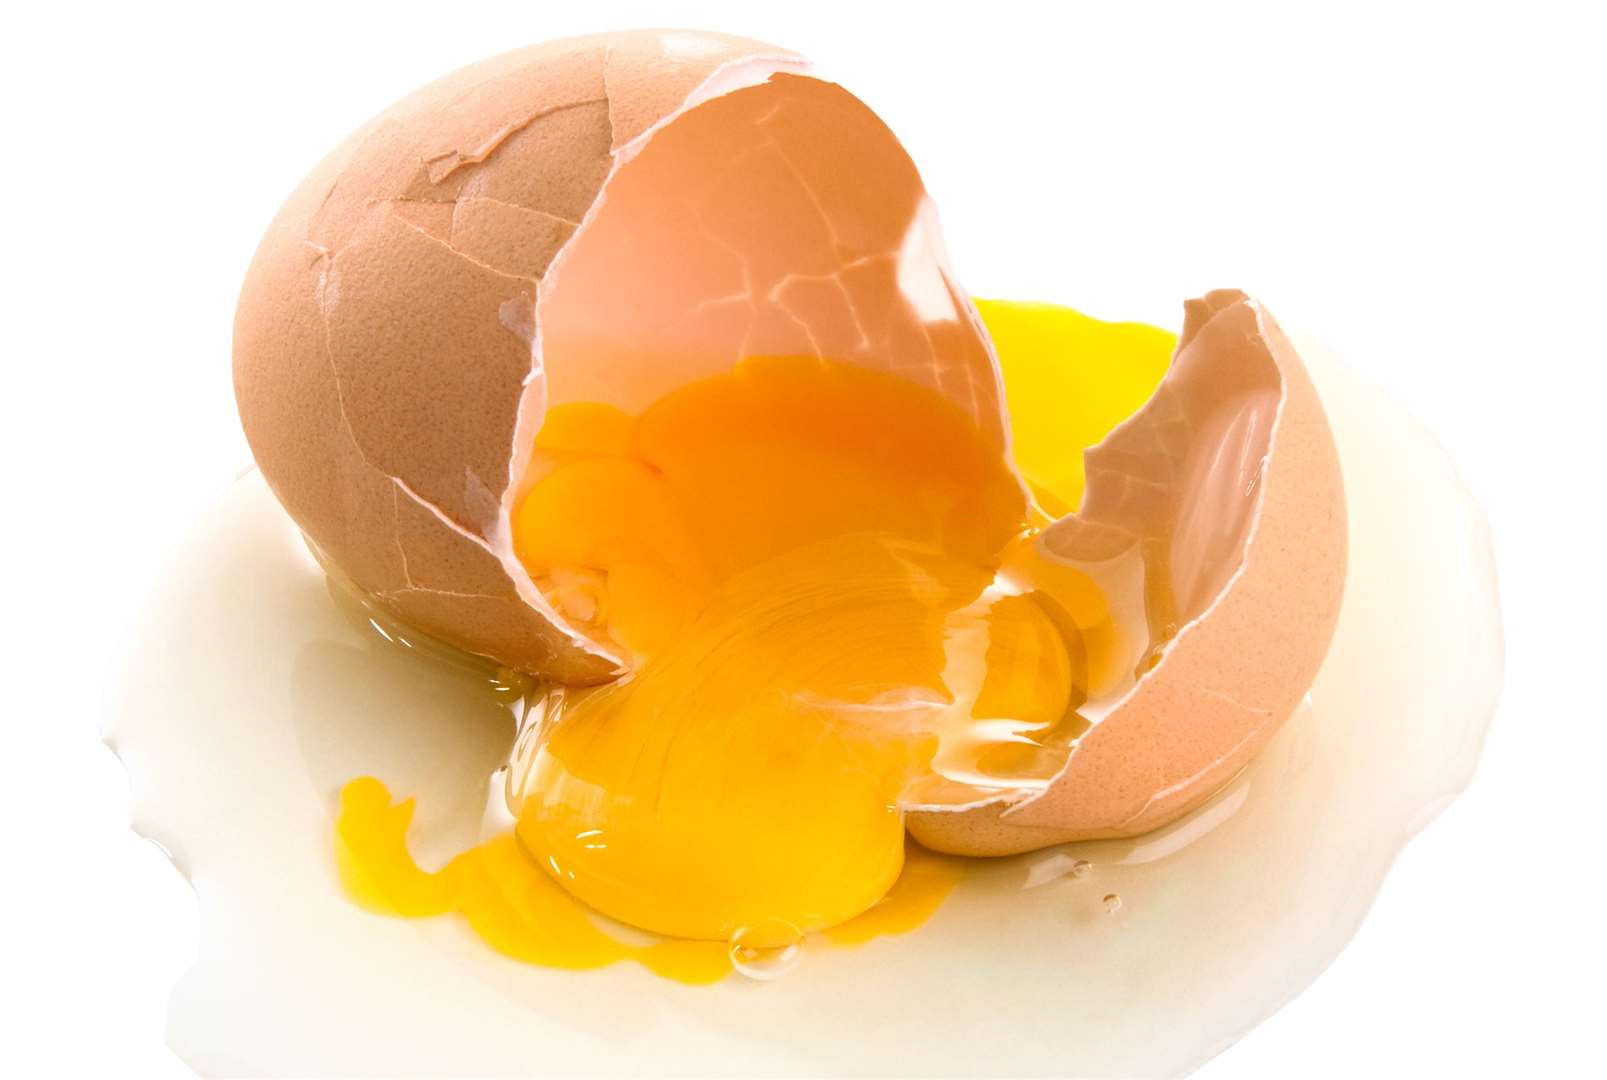 Supplies of eggs are dwindling. Image: iStock.